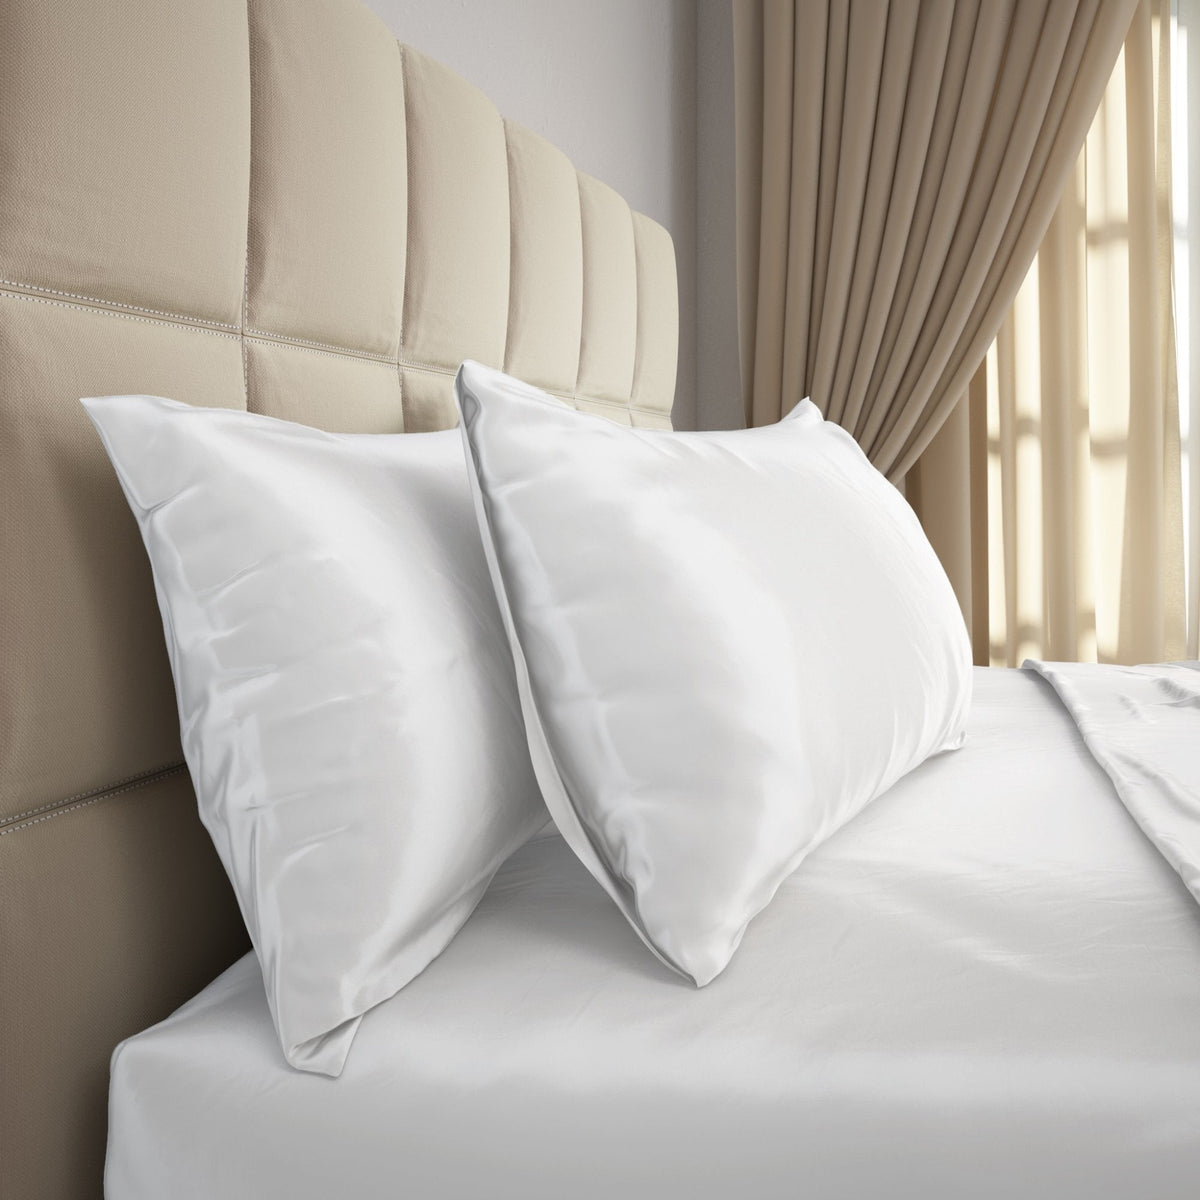 Side View of Mulberry Park Silks Deluxe 19 Momme Pure Silk Pillowcase in Ivory Color